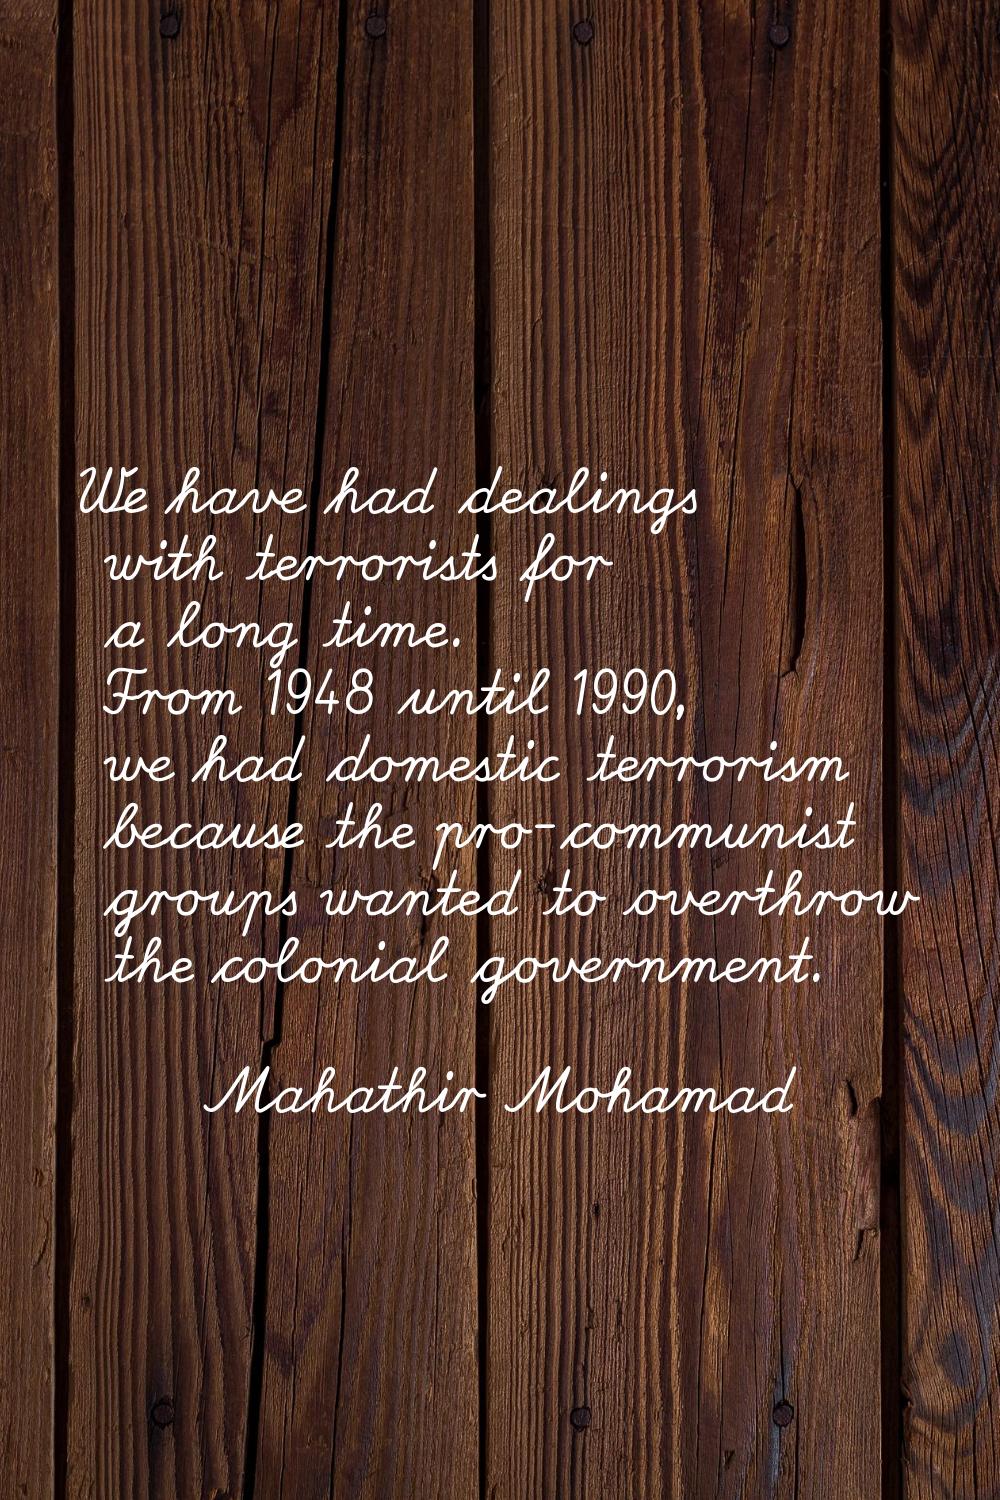 We have had dealings with terrorists for a long time. From 1948 until 1990, we had domestic terrori